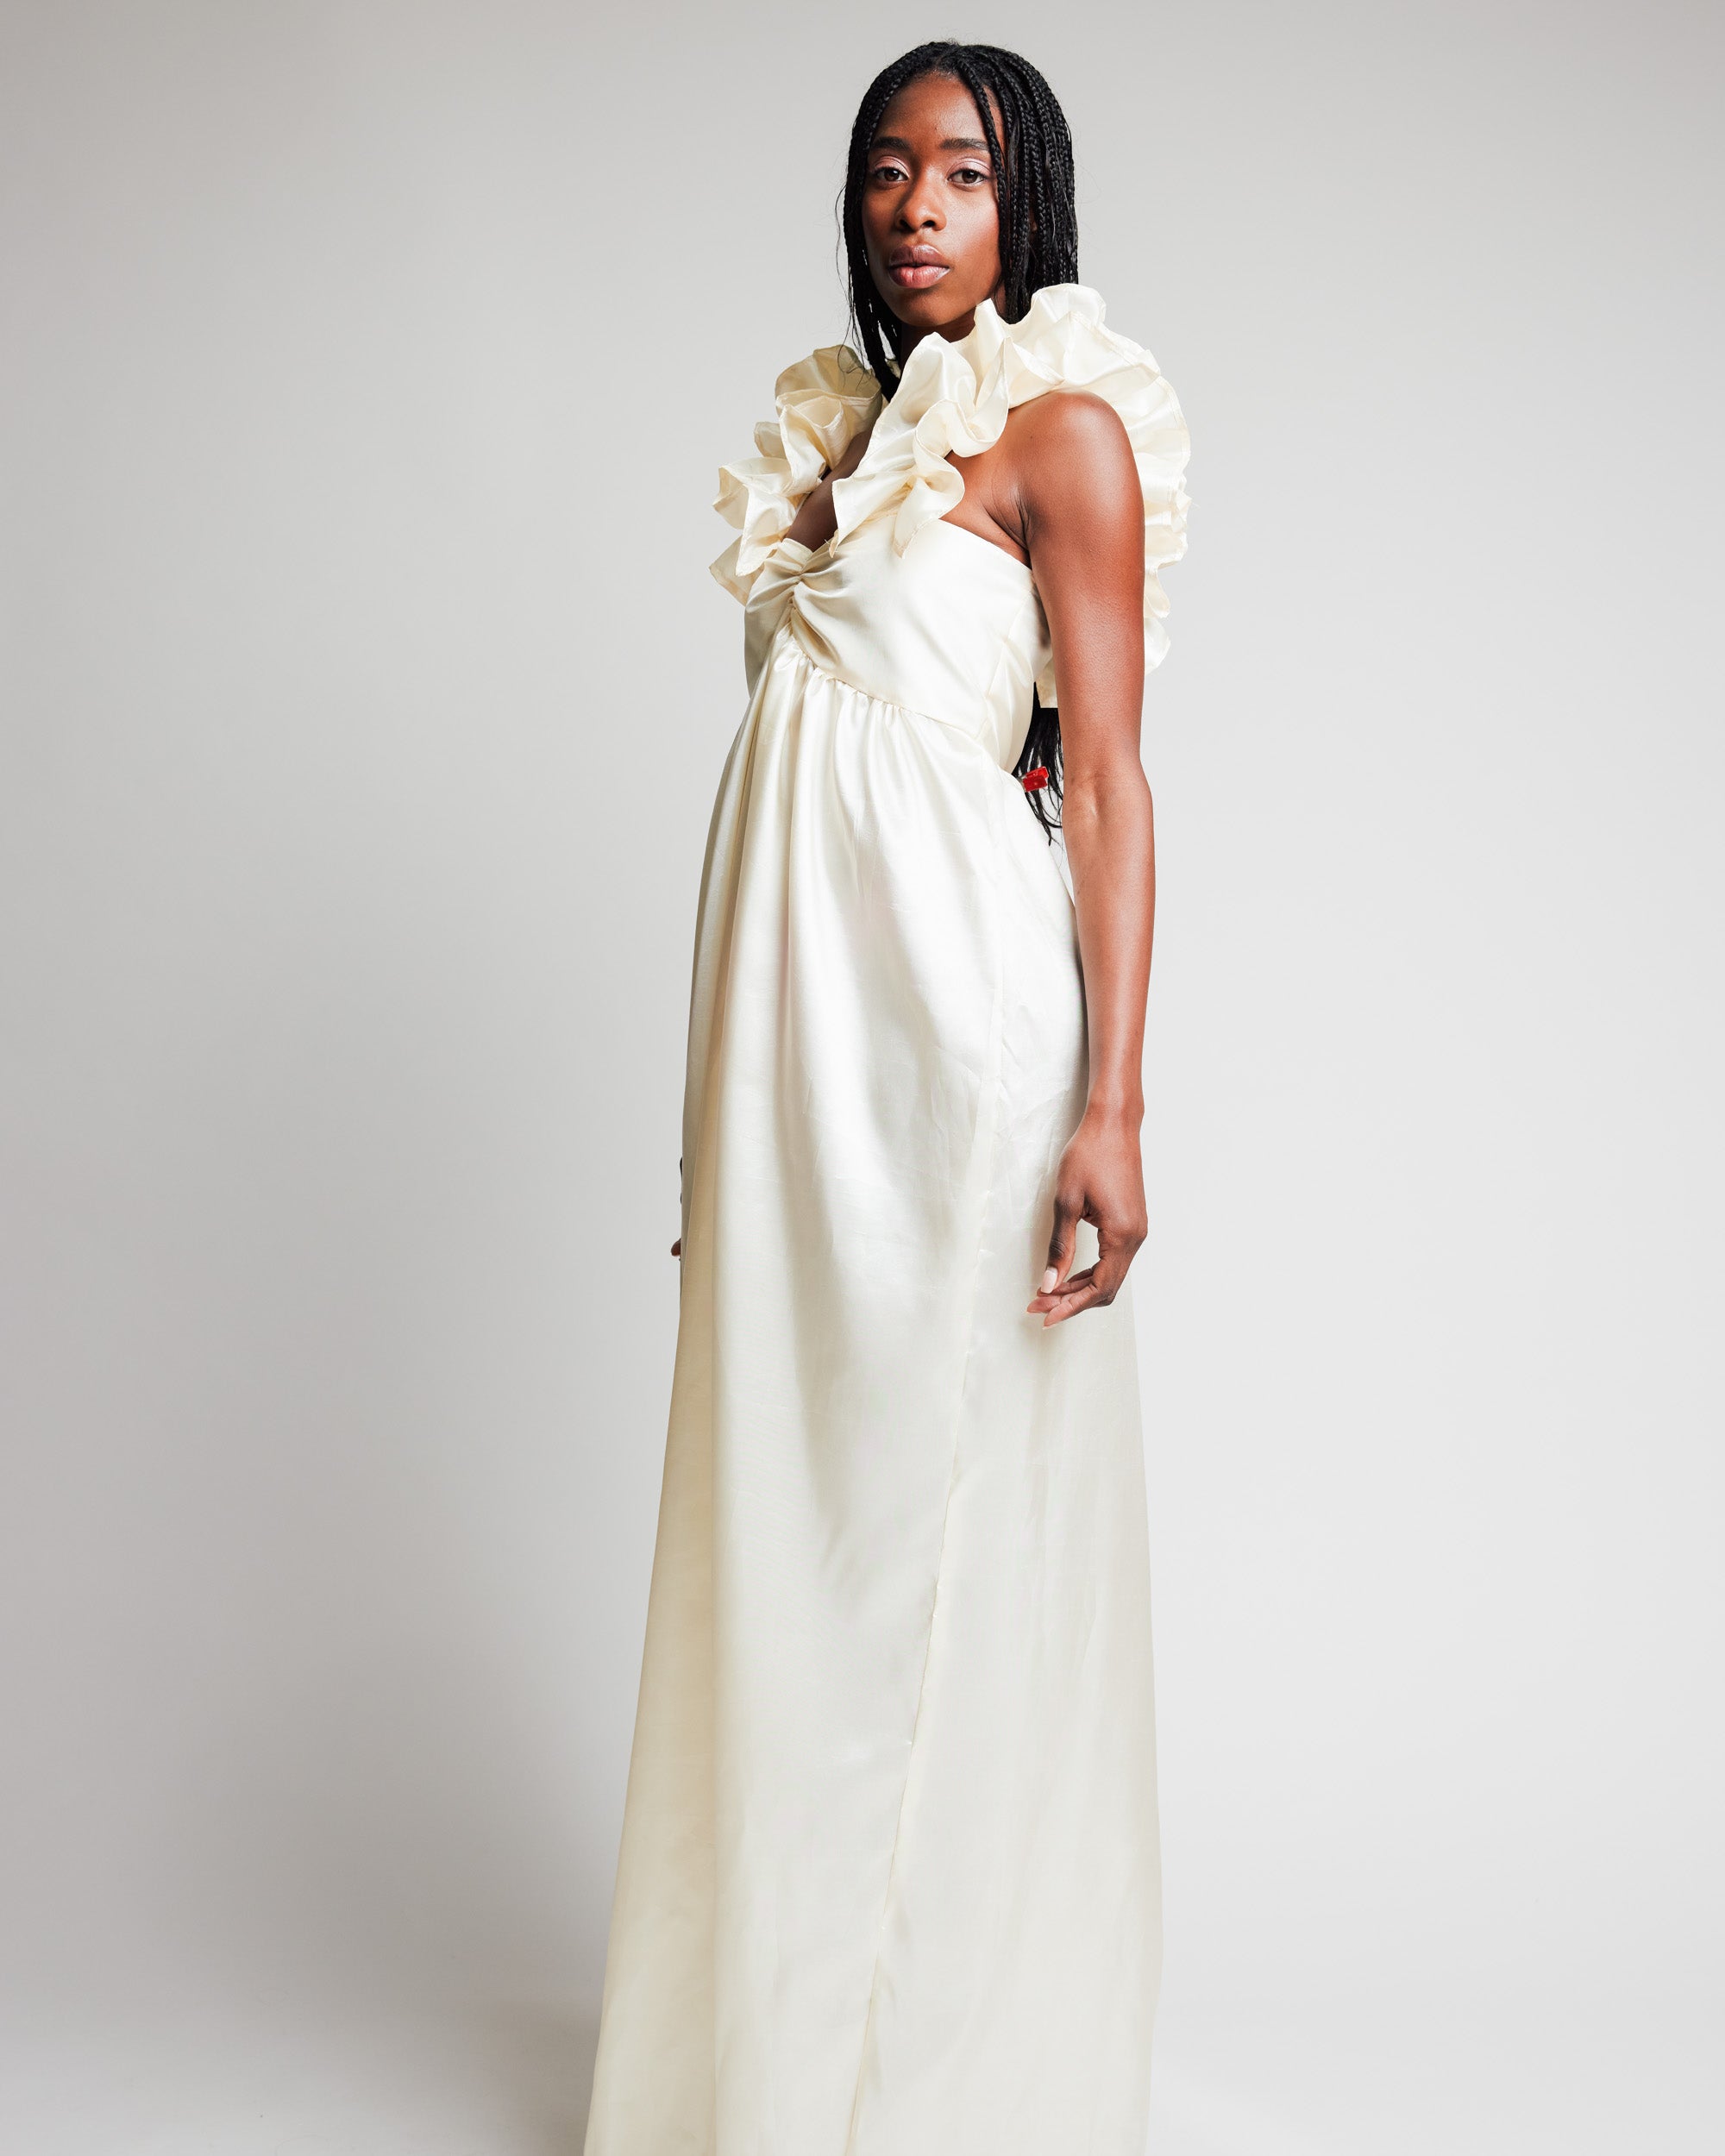 Cream Taffeta Gown with Juliette Sleeves by Madeline Marie